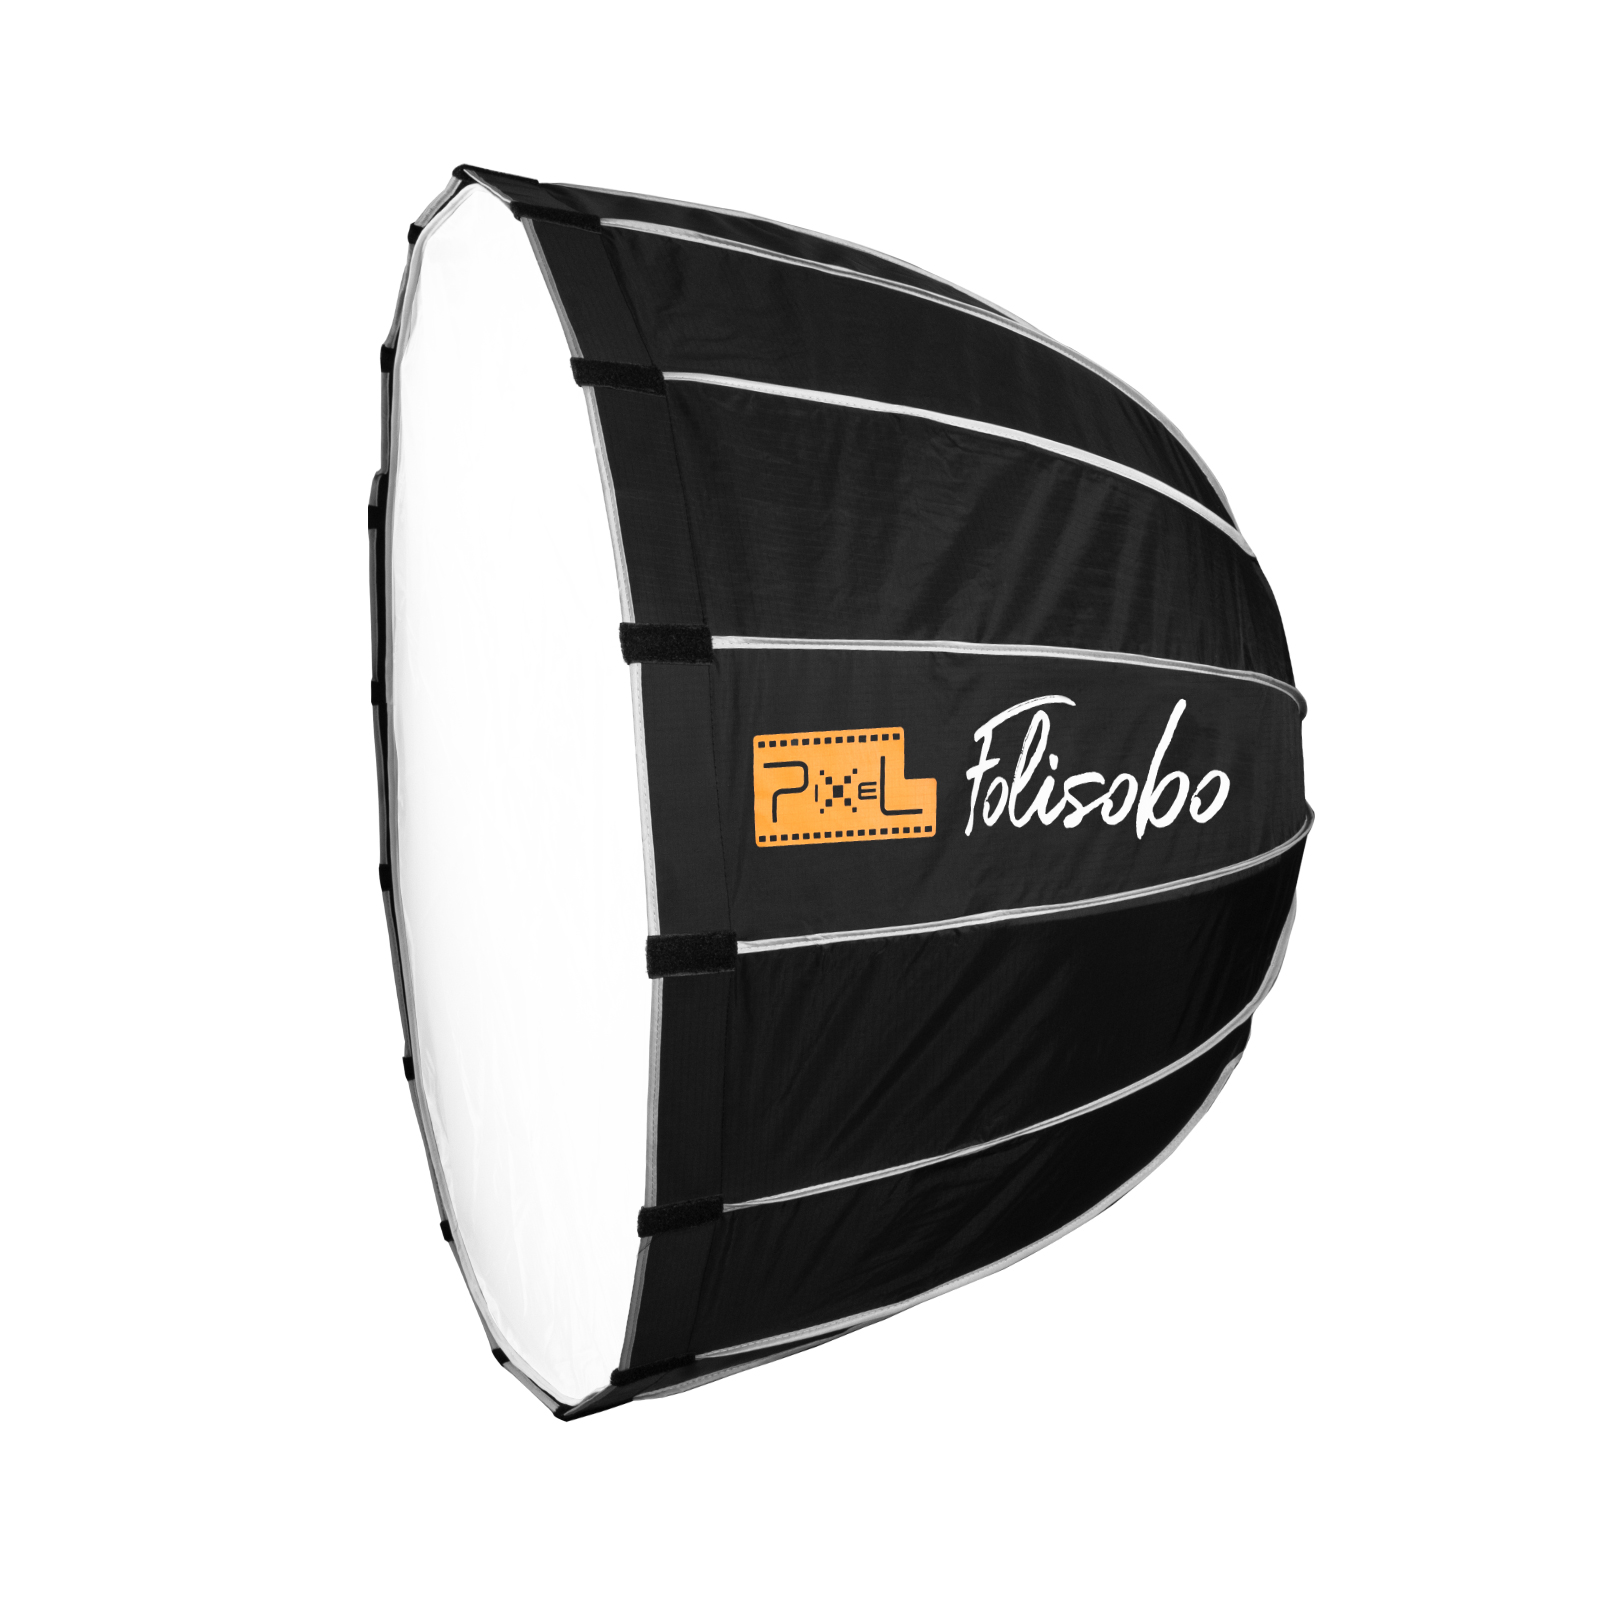 Pixel F90 LED Parabolic Softbox, soft light, delicate and even.